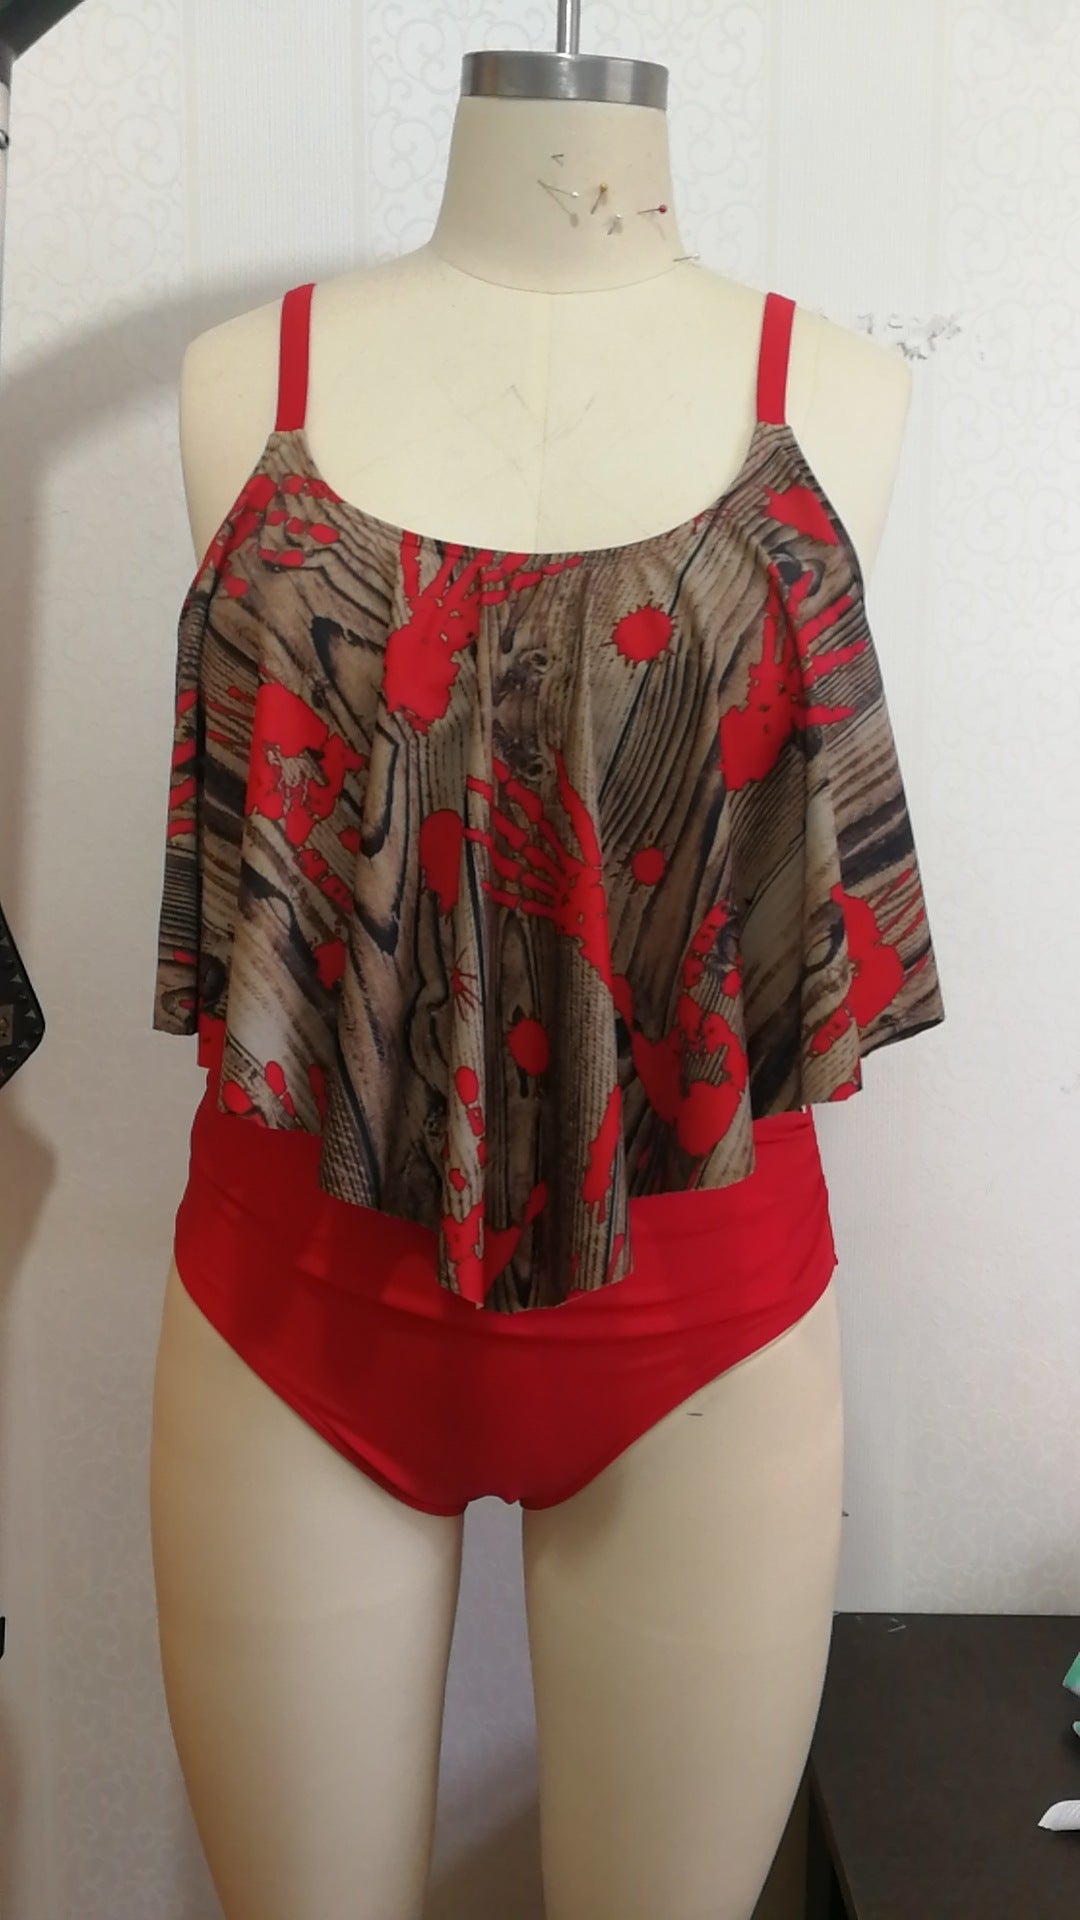 Red Ruffled Red Two Pieces Plus Sizes Summer Swimsuits-Swimwear-Red-L-Free Shipping Leatheretro